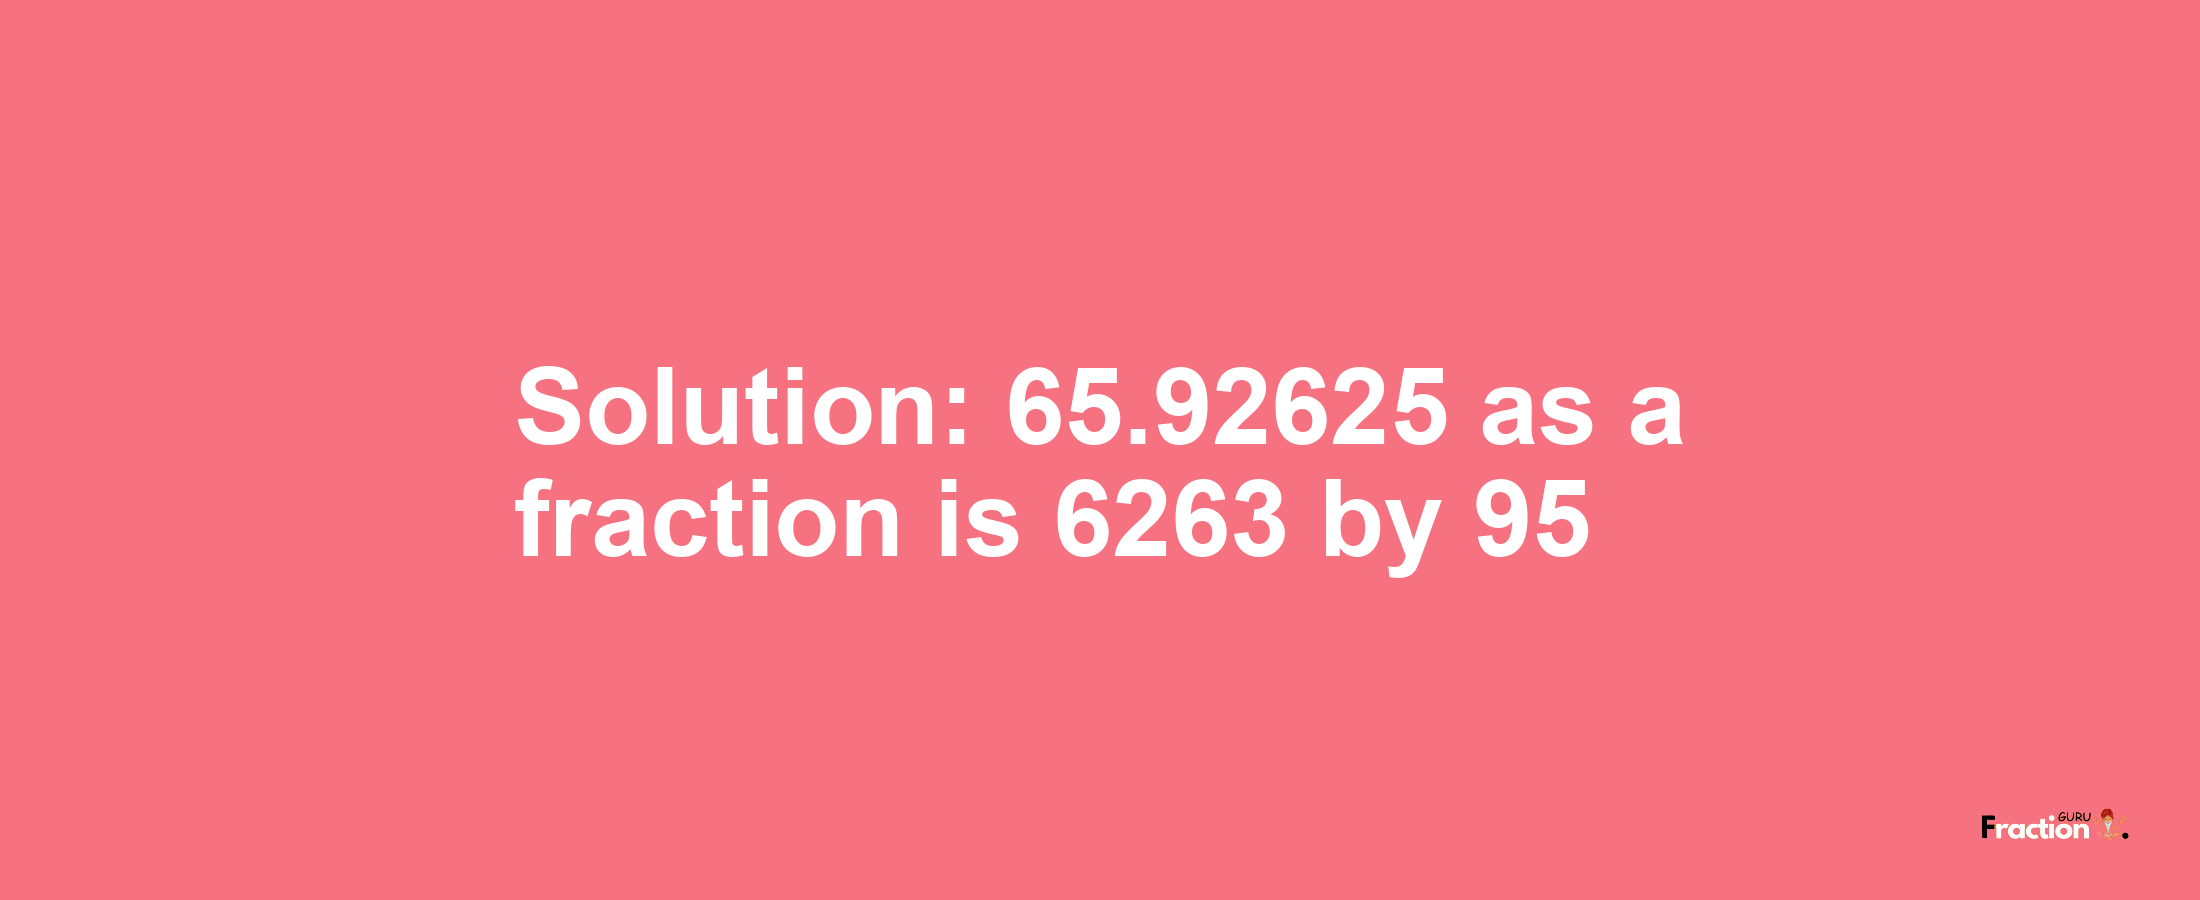 Solution:65.92625 as a fraction is 6263/95